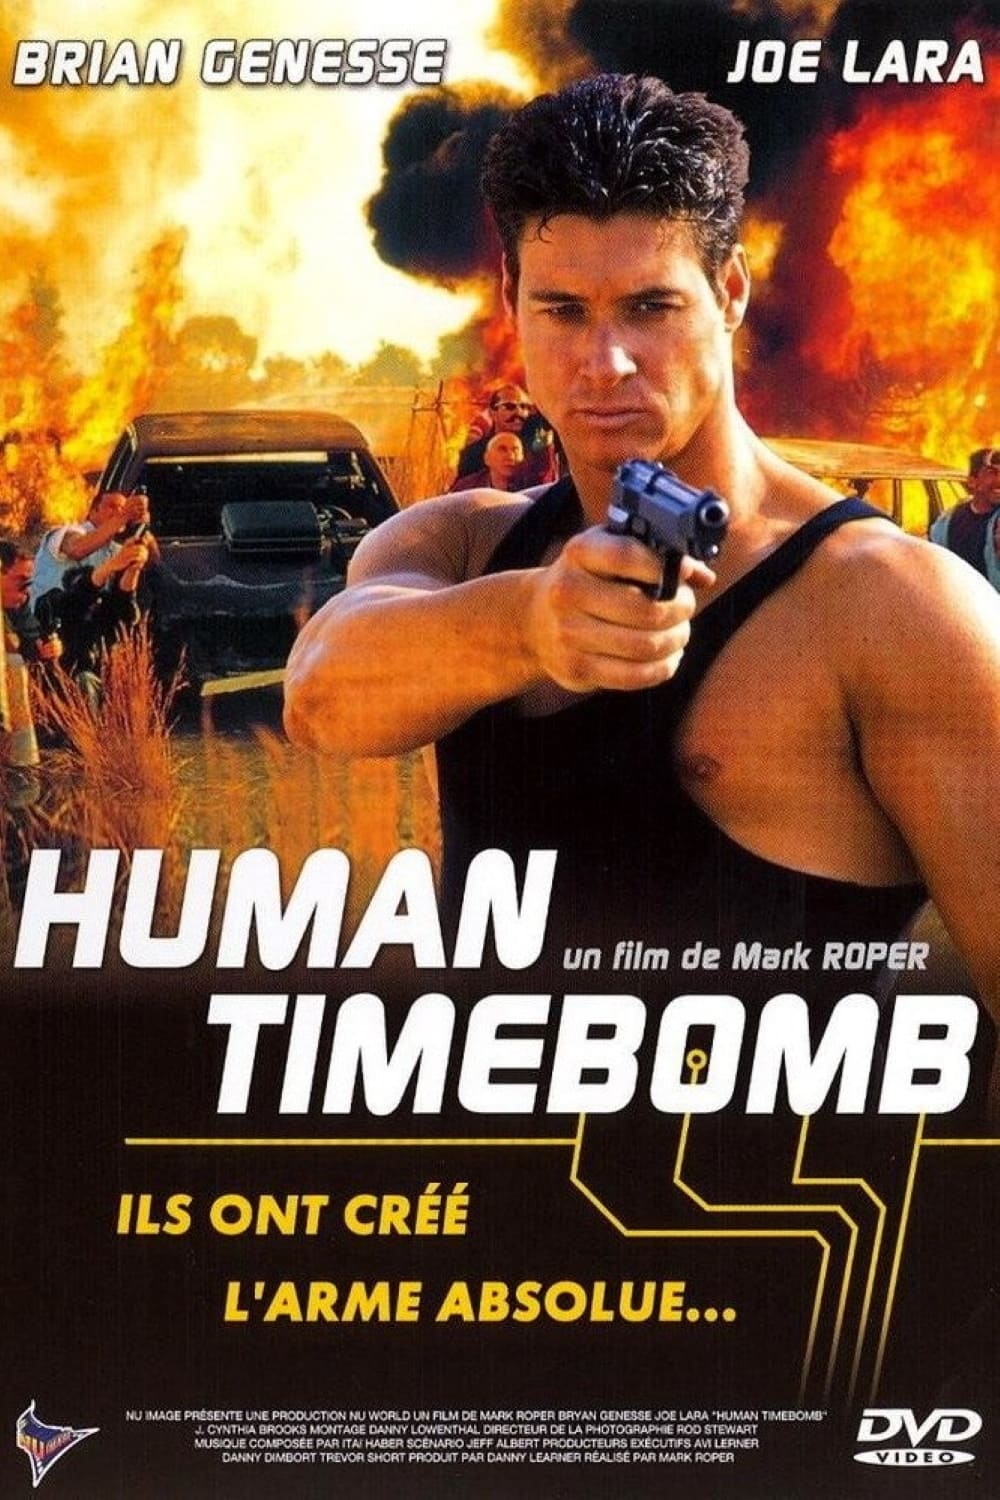 Live Wire: Human Time Bomb (1996)